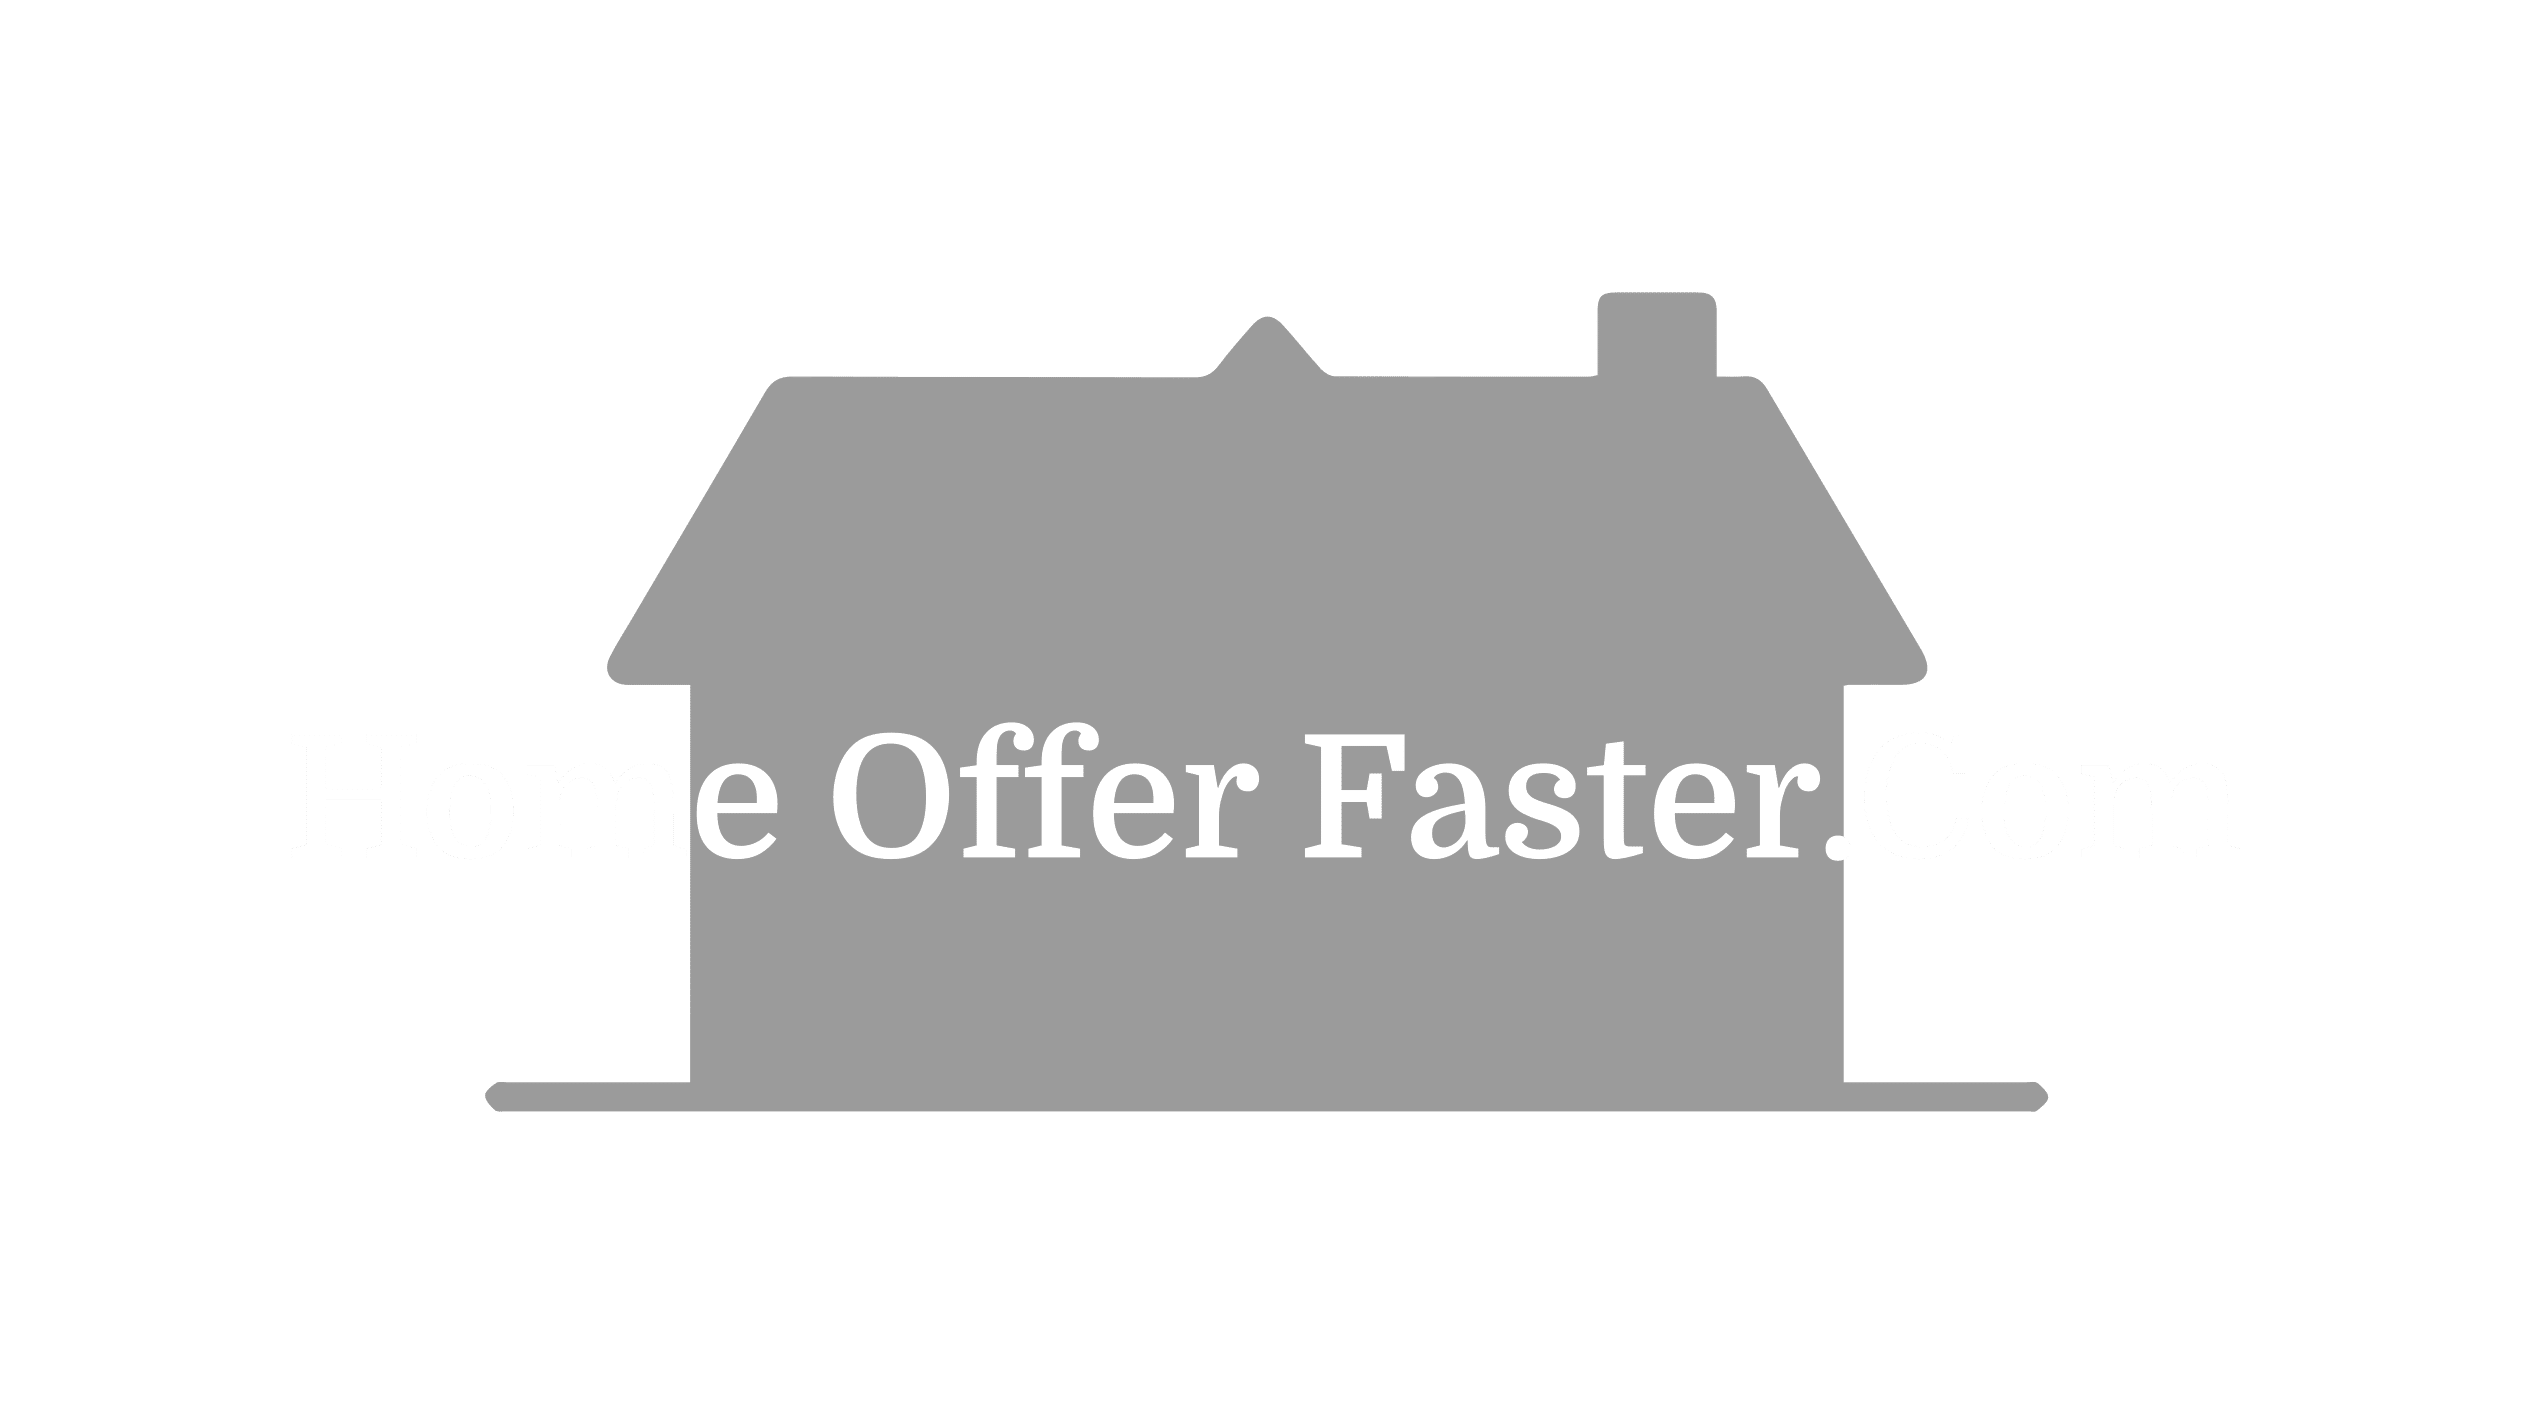 Home offer faster